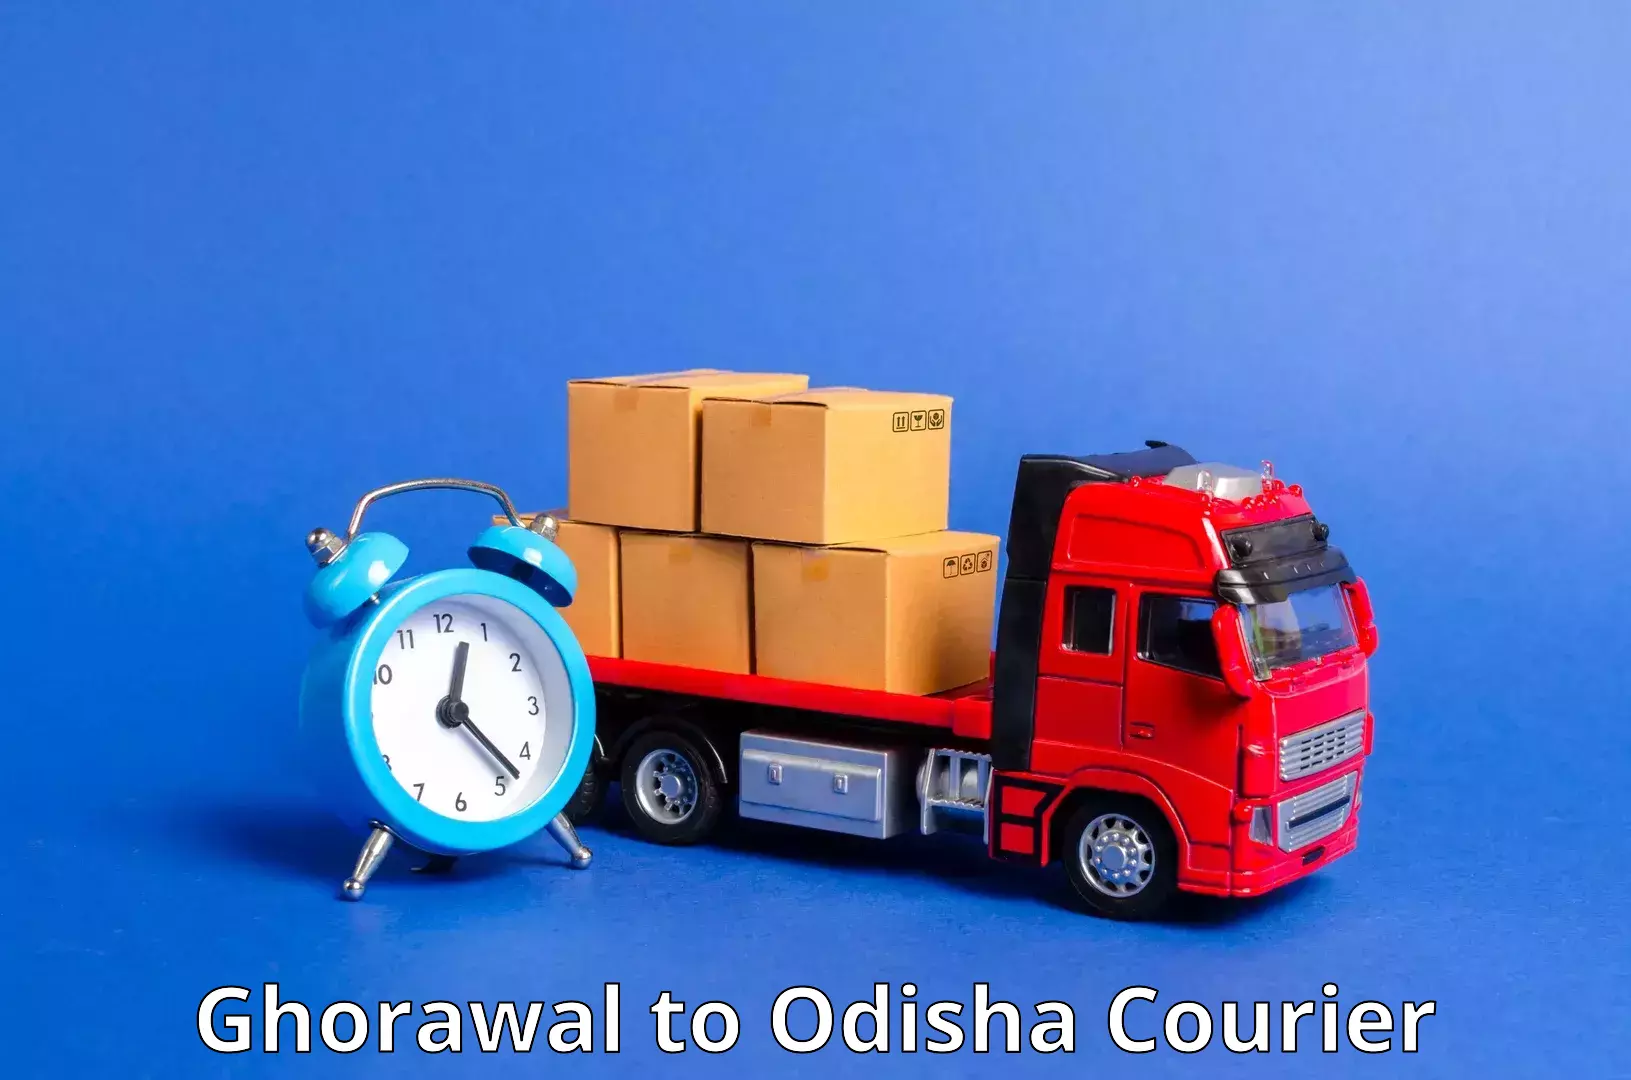 Fast delivery service in Ghorawal to Kotapad